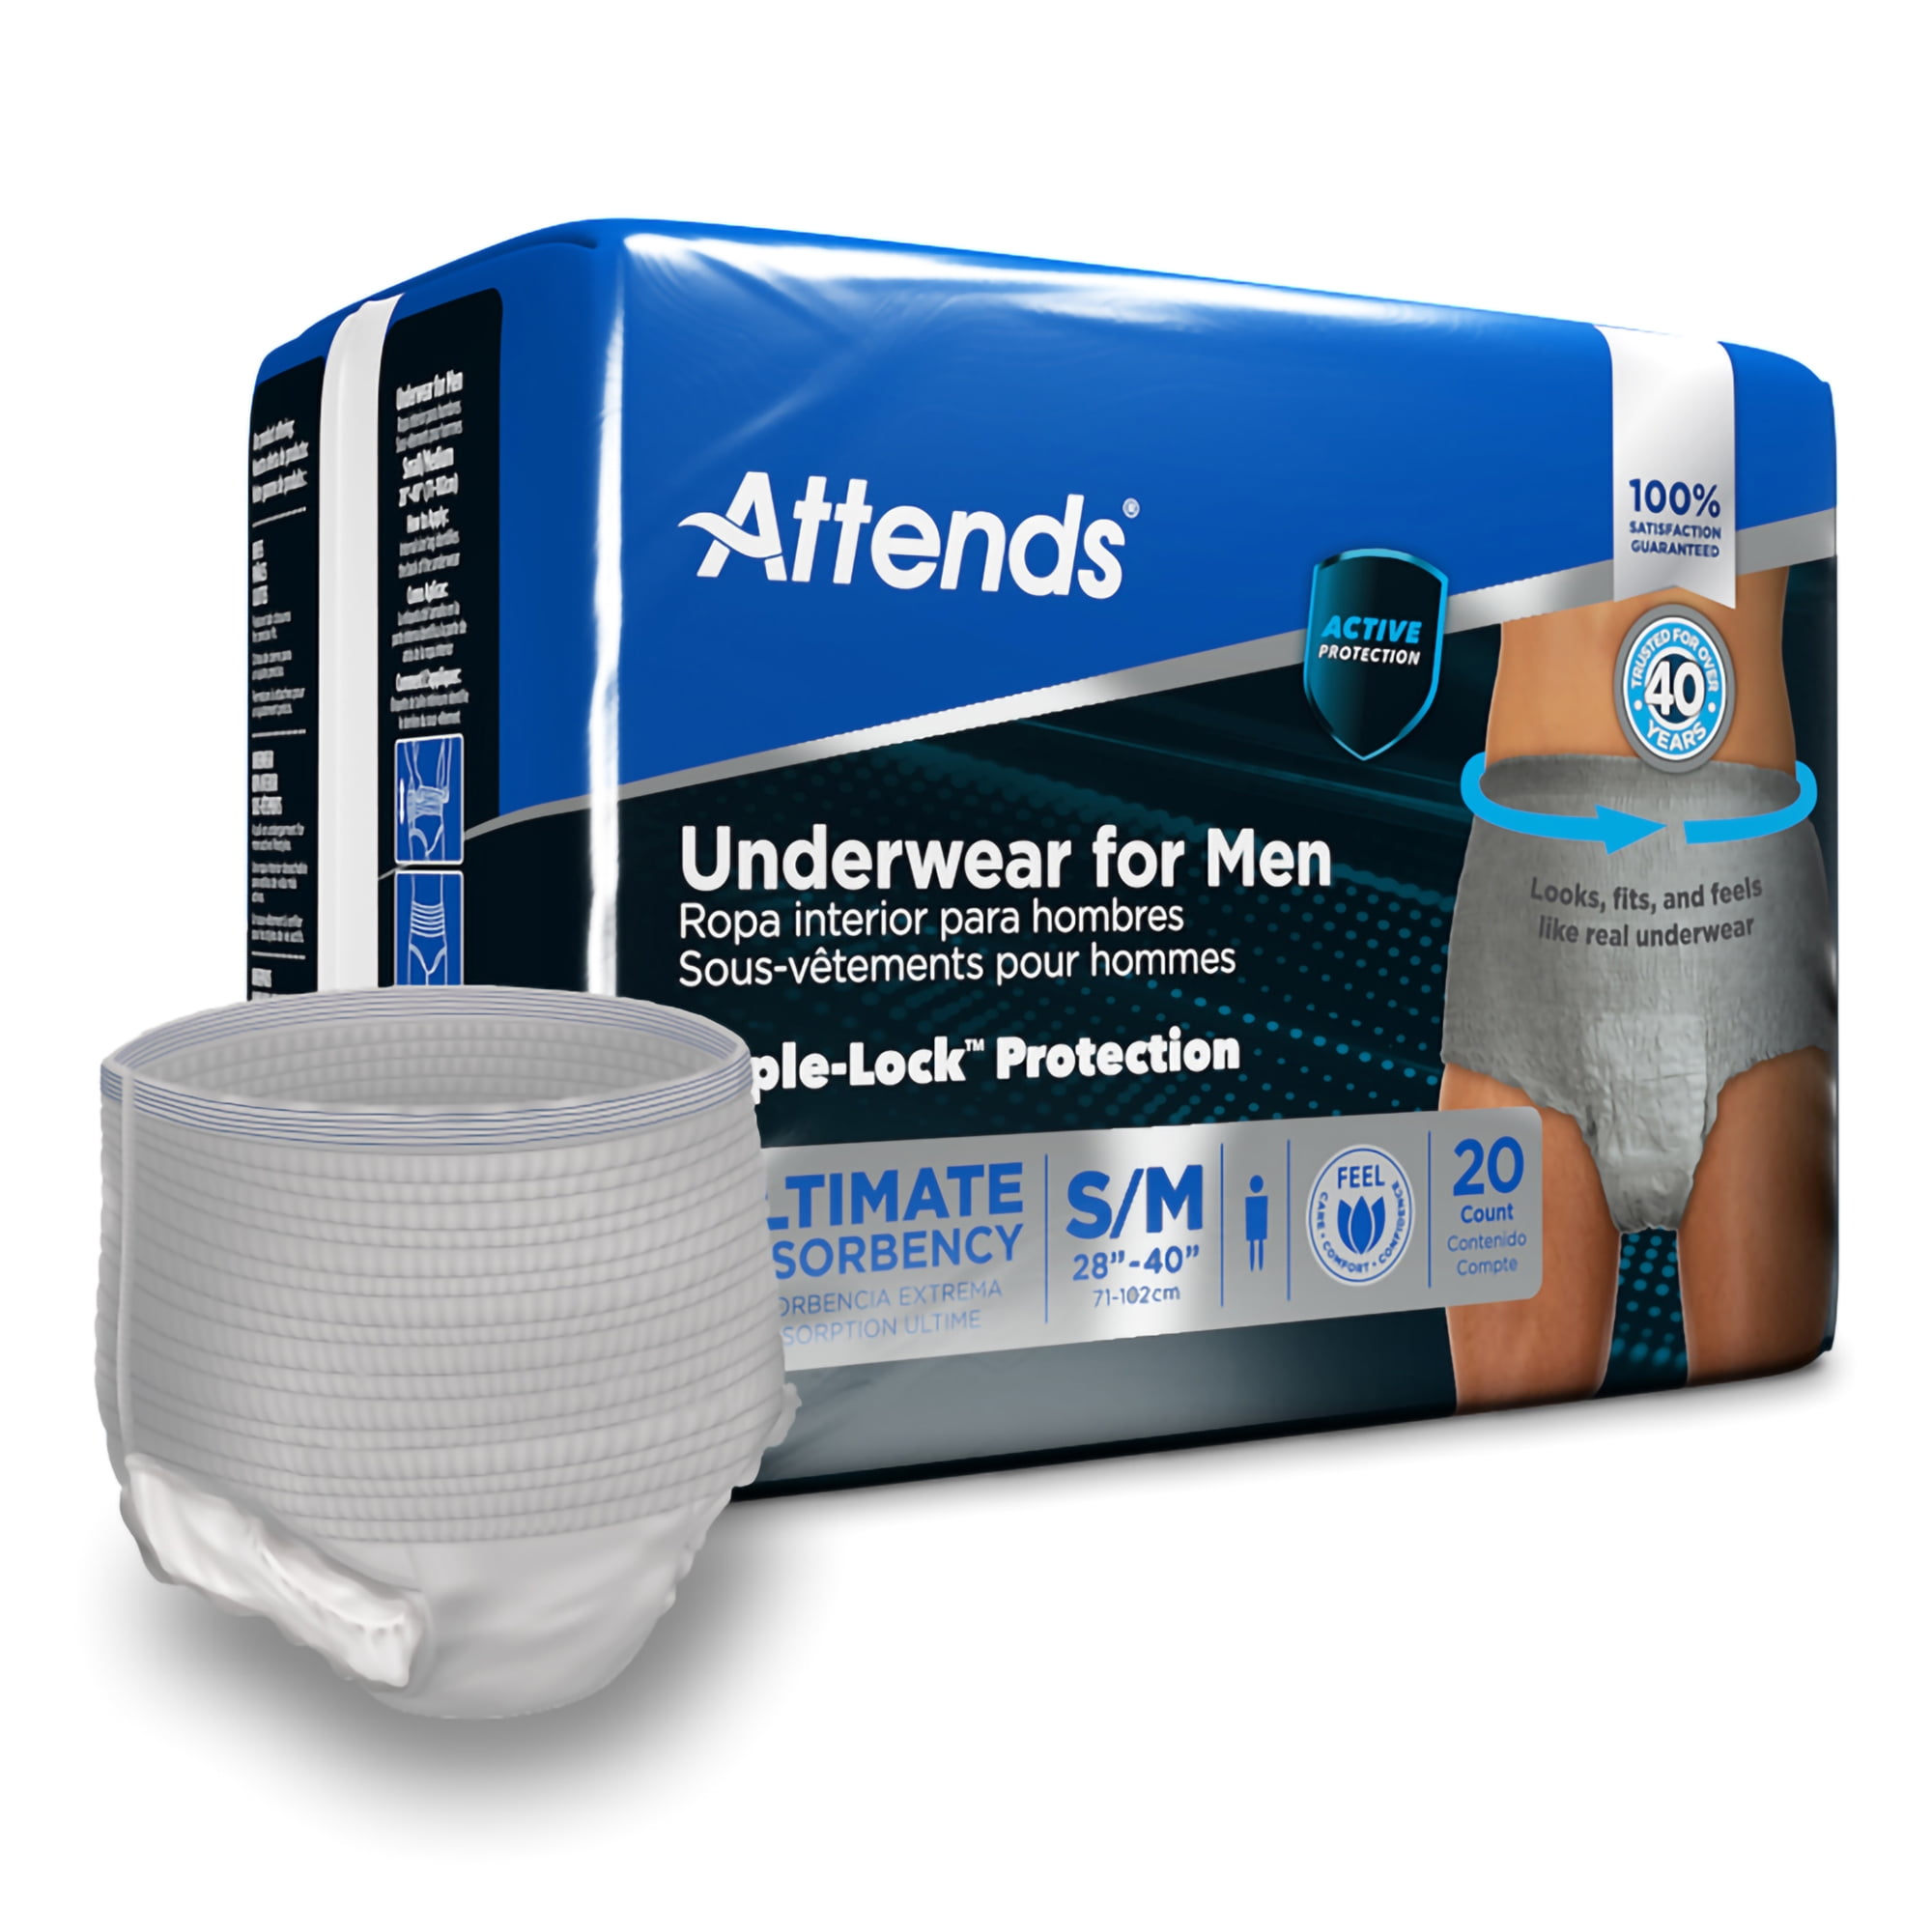 Attends Overnight Disposable Underwear Pull On with Tear Away Seams Large,  APPNT30, 56 Ct, Large, 56 ct - Jay C Food Stores